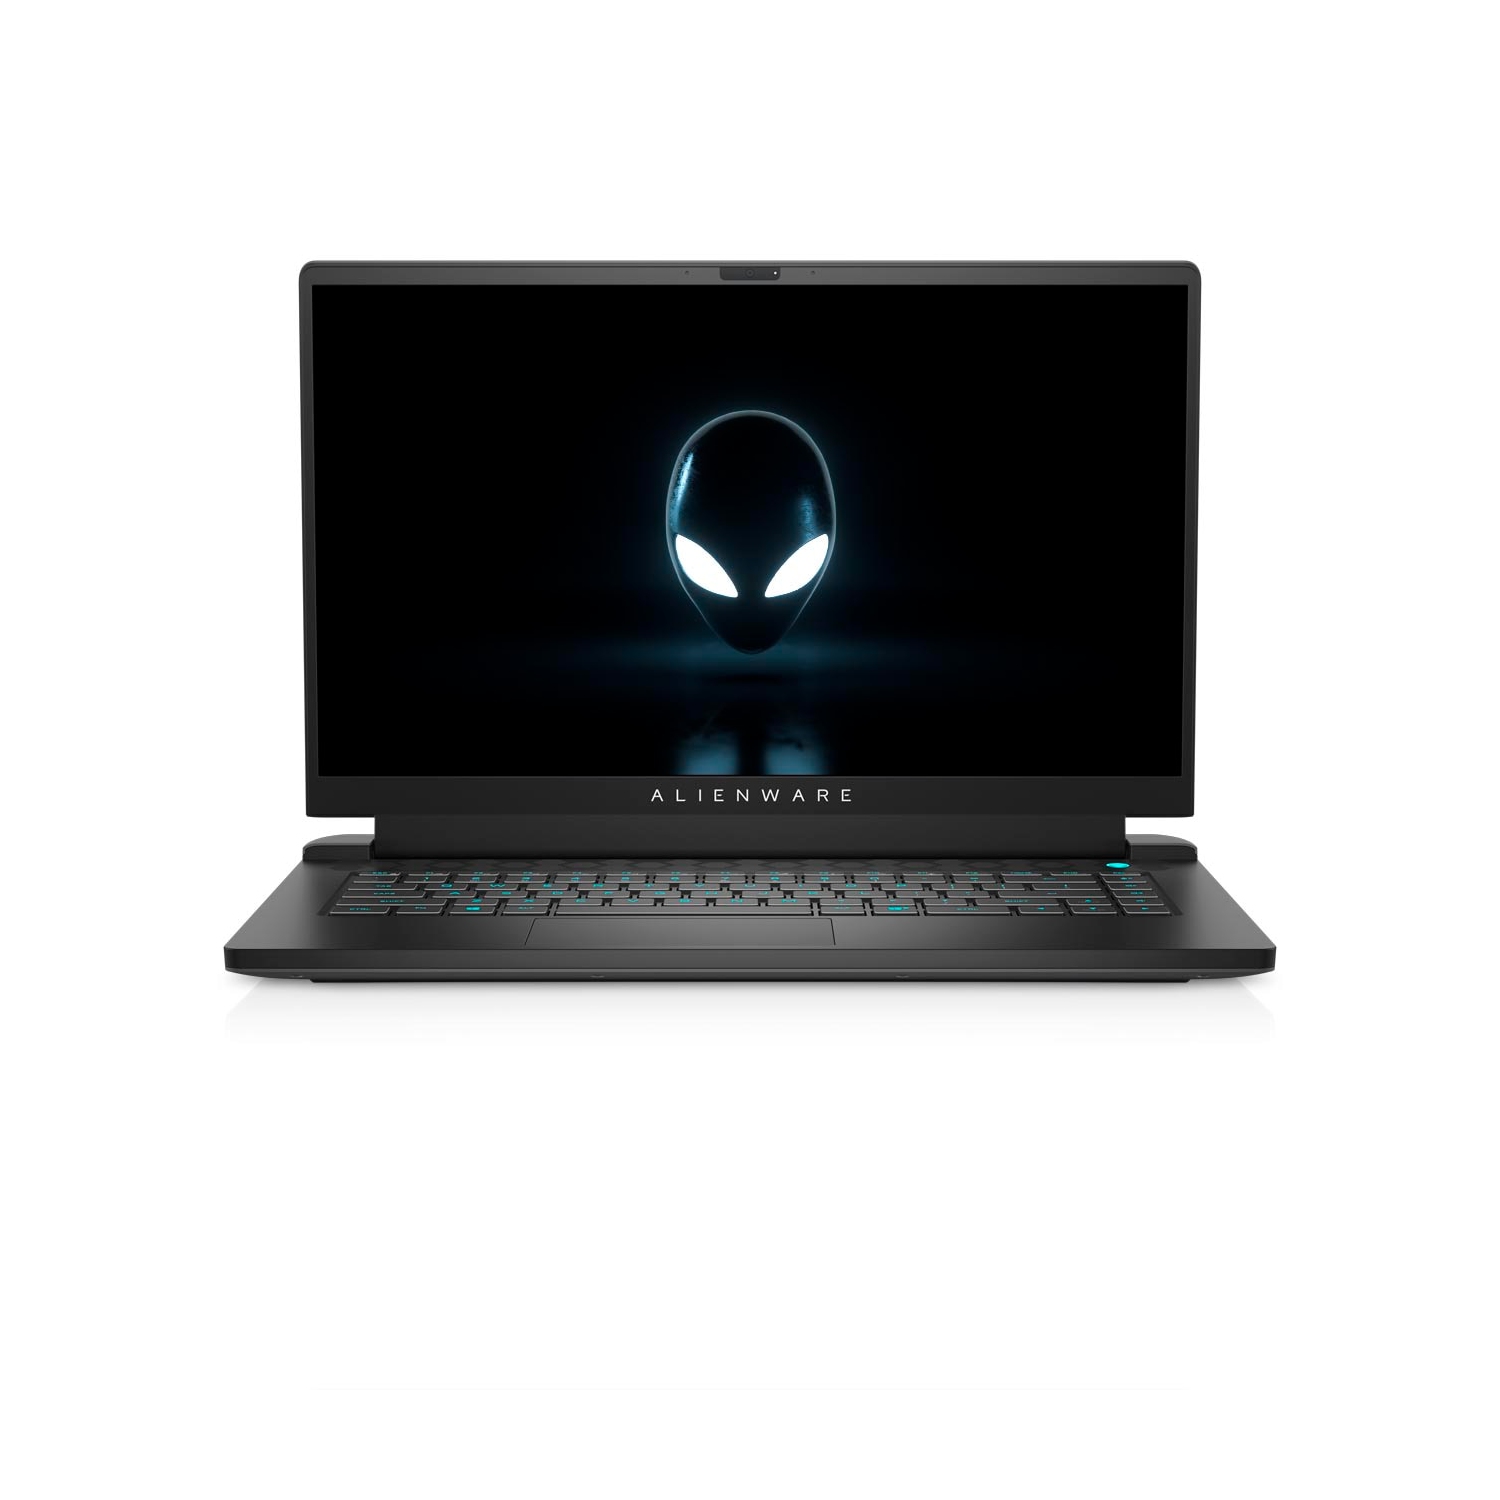 Refurbished (Excellent) - Dell Alienware m15 R5 Ryzen Edition Gaming Laptop (2021), 15.6" FHD, Core Ryzen 7, 512GB SSD, 16GB RAM, RTX 3070, 8 Cores @ 4.4 GHz Certified